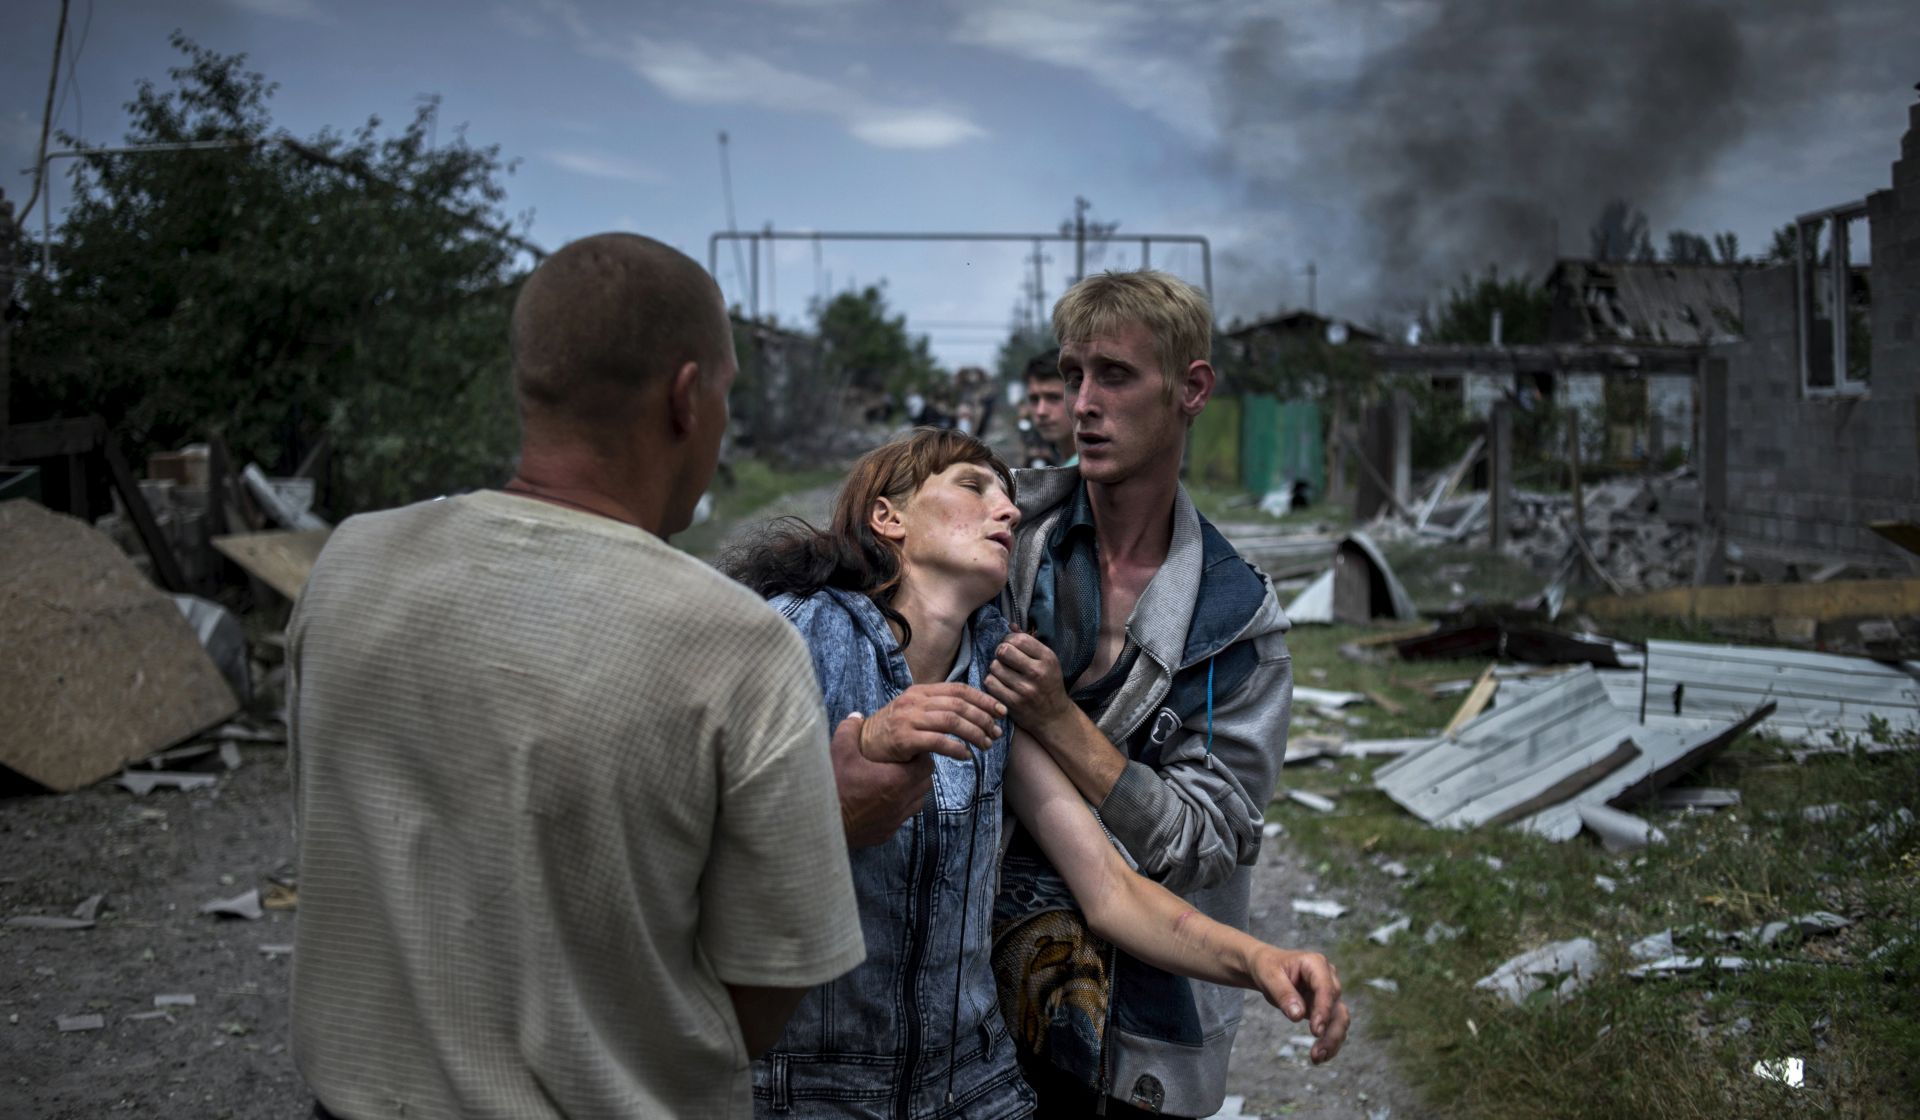 epa05790452 A handout photo made available by the World Press Photo (WPP) organization on 13 February 2017 shows a picture by Rossiya Segodnya photographer Valery Melnikov that won the Long-Term Projects - First Prize award of the 60th annual World Press Photo Contest, it was announced by the WPP Foundation in Amsterdam, The Netherlands on 13 February 2017.

Long-Term Projects - First Prize

© Valery Melnikov, Rossiya Segodnya
Title: Black Days Of Ukraine

Photo caption: 
Citizens in the village of Luhanskaya after the air attack.

Story: 
Ordinary people became victims of the conflict between self-proclaimed republics and the official Ukrainian authorities from 2014 onwards in the region of Donbass. Disaster came into their lives unexpectedly. These people were involved in the military confrontation against their will. They experienced the most terrible things: the death of their friends and relatives, destroyed homes and the ruined lives of thousands of people.  EPA/Valery Melnikov/Rossiya Segodnya/WORLD PRESS PHOTO HANDOUT ATTENTION EDITORS : EDITORIAL USE ONLY / NO SALES / NO ARCHIVE / NO CROPPING / NO MANIPULATING / USE ONLY FOR SINGLE PUBLICATION IN CONNECTION WITH THE WORLD PRESS PHOTO AND ITS ACTIVITIES HANDOUT EDITORIAL USE ONLY/NO SALES/NO ARCHIVES HANDOUT EDITORIAL USE ONLY/NO SALES/NO ARCHIVES